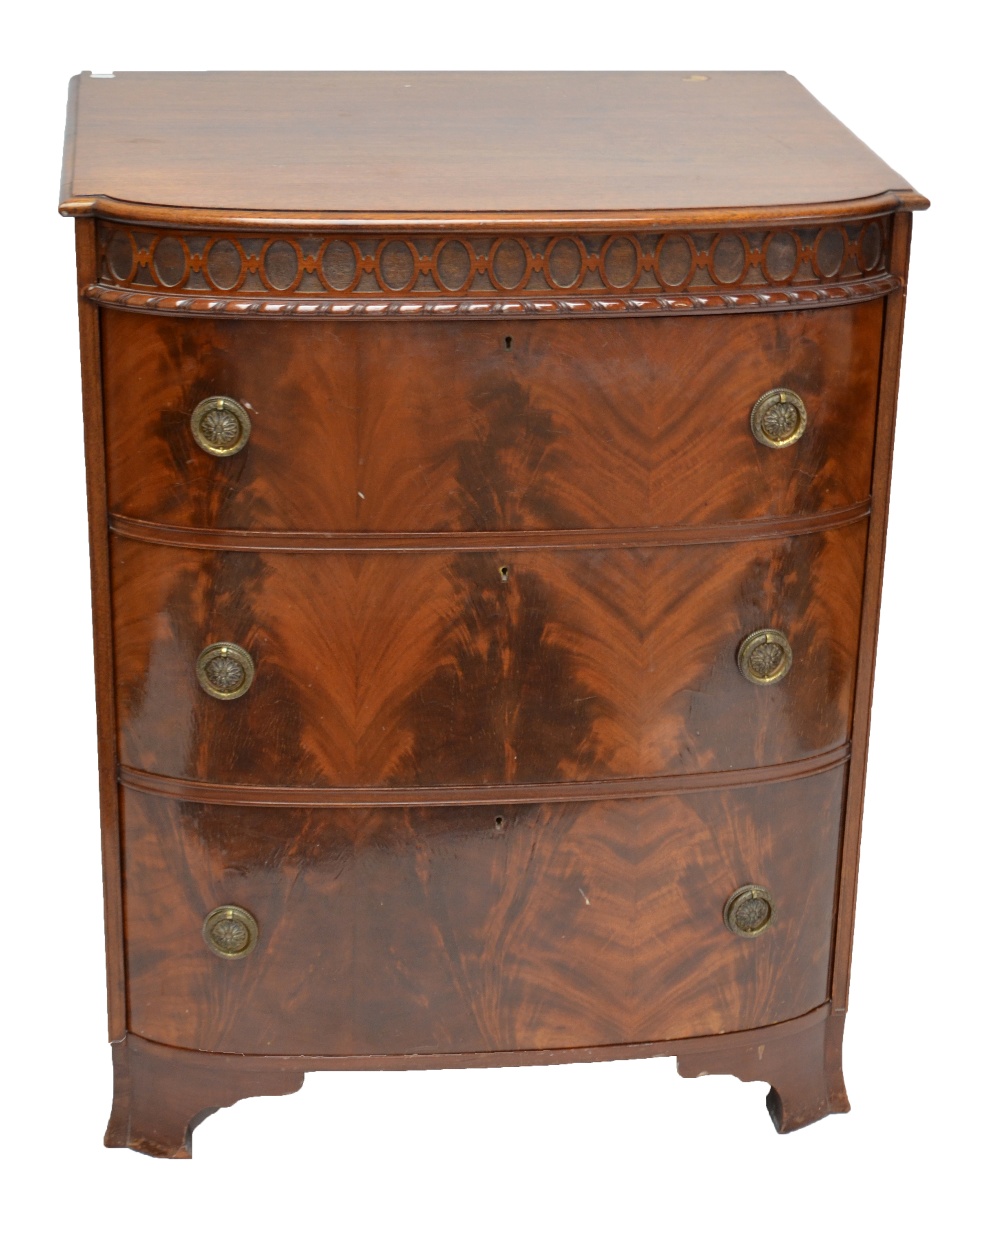 A mahogany bowfronted three drawer chest, formerly the centre section from a compactum wardrobe,